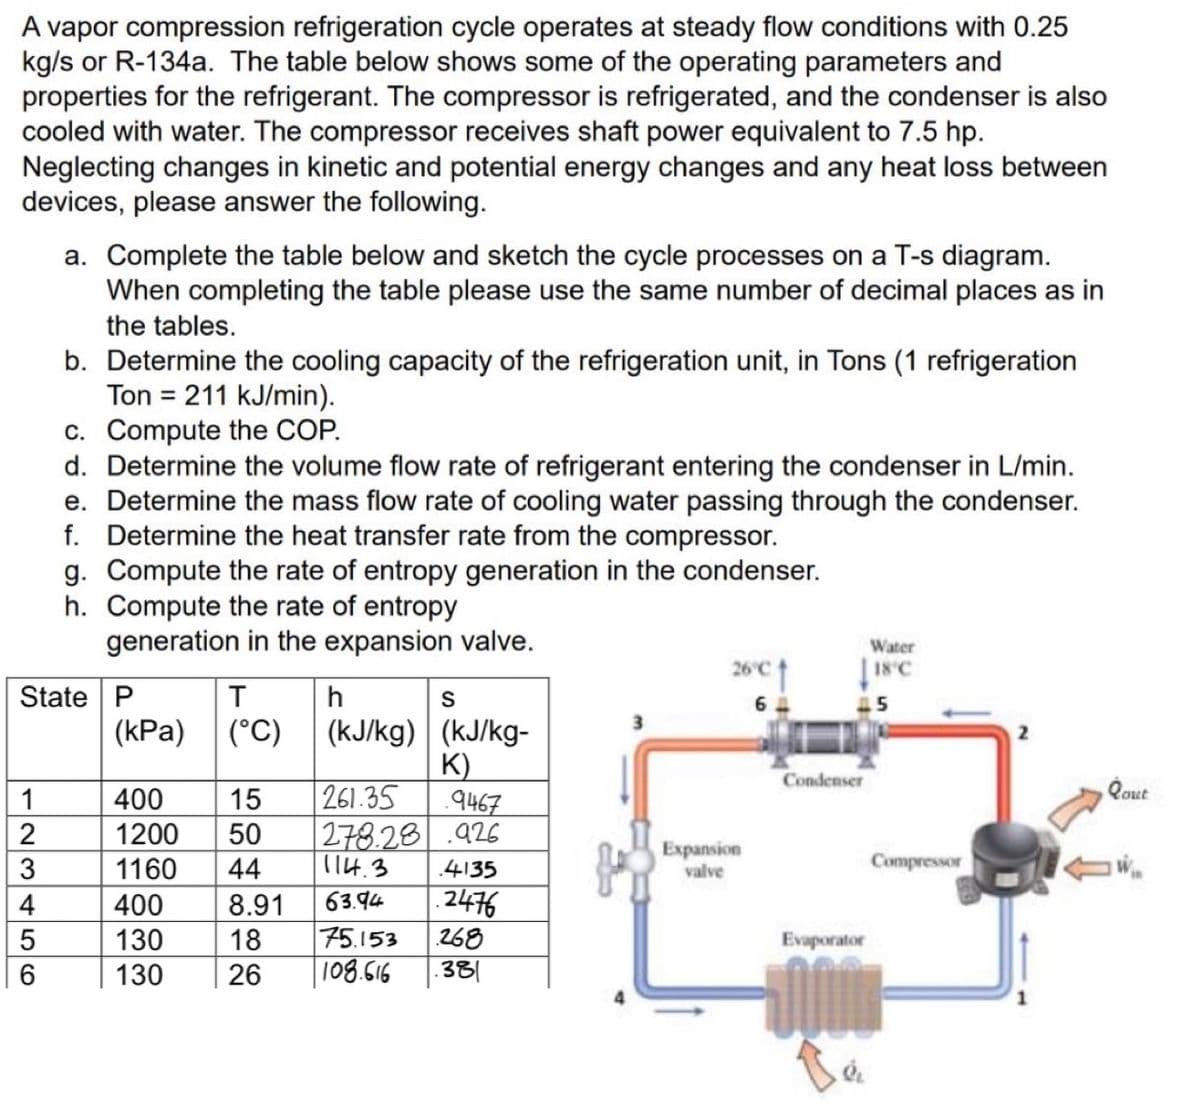 A vapor compression refrigeration cycle operates at steady flow conditions with 0.25
kg/s or R-134a. The table below shows some of the operating parameters and
properties for the refrigerant. The compressor is refrigerated, and the condenser is also
cooled with water. The compressor receives shaft power equivalent to 7.5 hp.
Neglecting changes in kinetic and potential energy changes and any heat loss between
devices, please answer the following.
a. Complete the table below and sketch the cycle processes on a T-s diagram.
When completing the table please use the same number of decimal places as in
the tables.
123456
b. Determine the cooling capacity of the refrigeration unit, in Tons (1 refrigeration
Ton=211 kJ/min).
Compute the COP.
c.
d. Determine the volume flow rate of refrigerant entering the condenser in L/min.
e. Determine the mass flow rate of cooling water passing through the condenser.
f. Determine the heat transfer rate from the compressor.
g. Compute the rate of entropy generation in the condenser.
h. Compute the rate of entropy
generation in the expansion valve.
State P
T
(kPa) (°C)
400 15
1200 50
1160 44
400 8.91
130 18
130
h
S
(kJ/kg) (kJ/kg-
K)
261.35
.9467
278.28 926
114.3 .4135
63.94 2476
75.153 268
26 108.616 .381
26°C
Expansion
valve
Condenser
Evaporator
N
Water
18°C
Compressor
Qout
W